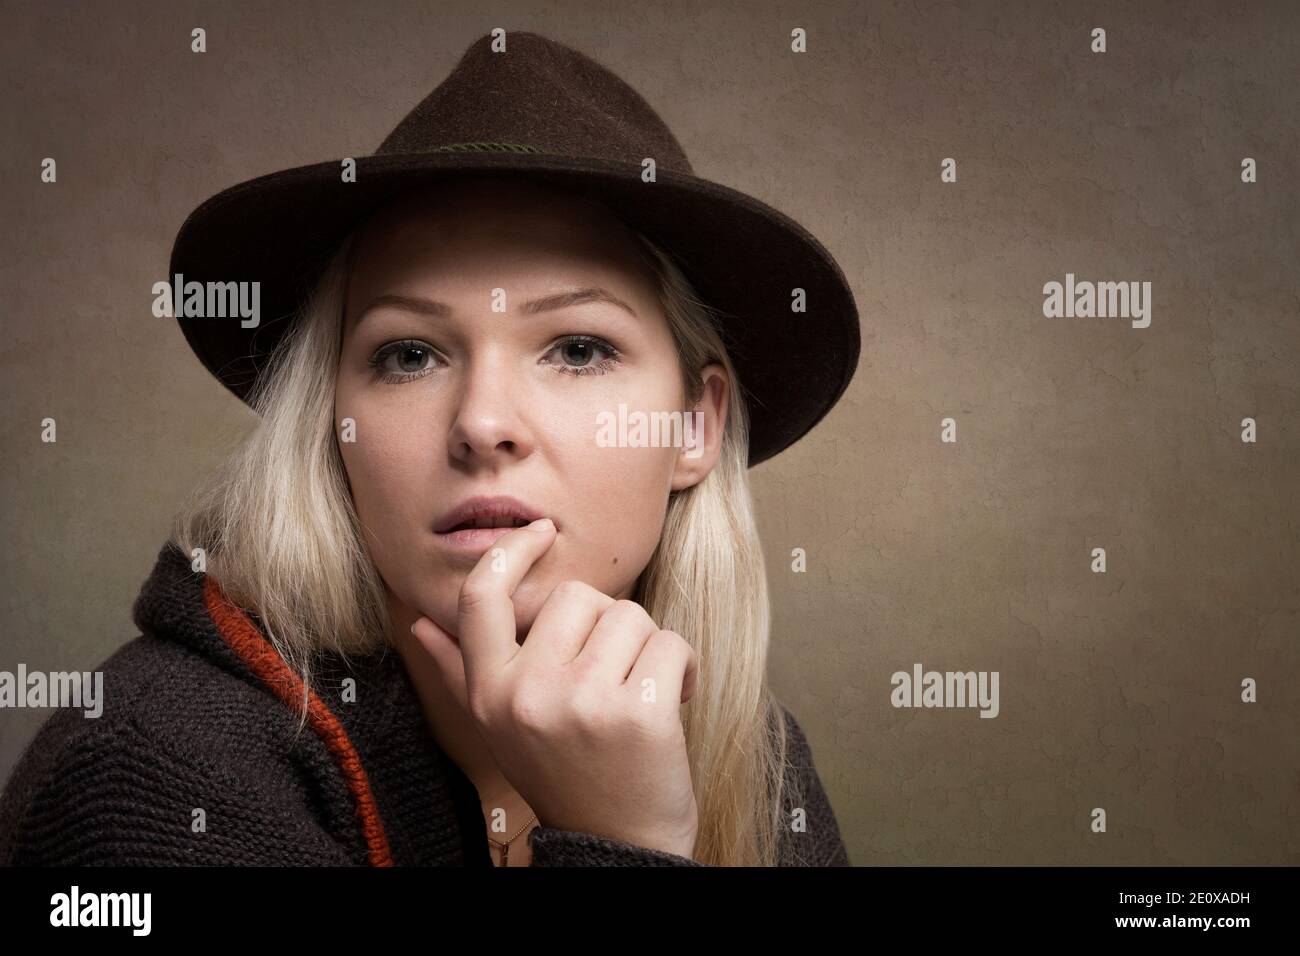 Portrait Shot Of A Young Woman With Blond Hair And A Brown Loden Hat Who Looks Thoughtfully At The Viewer Stock Photo